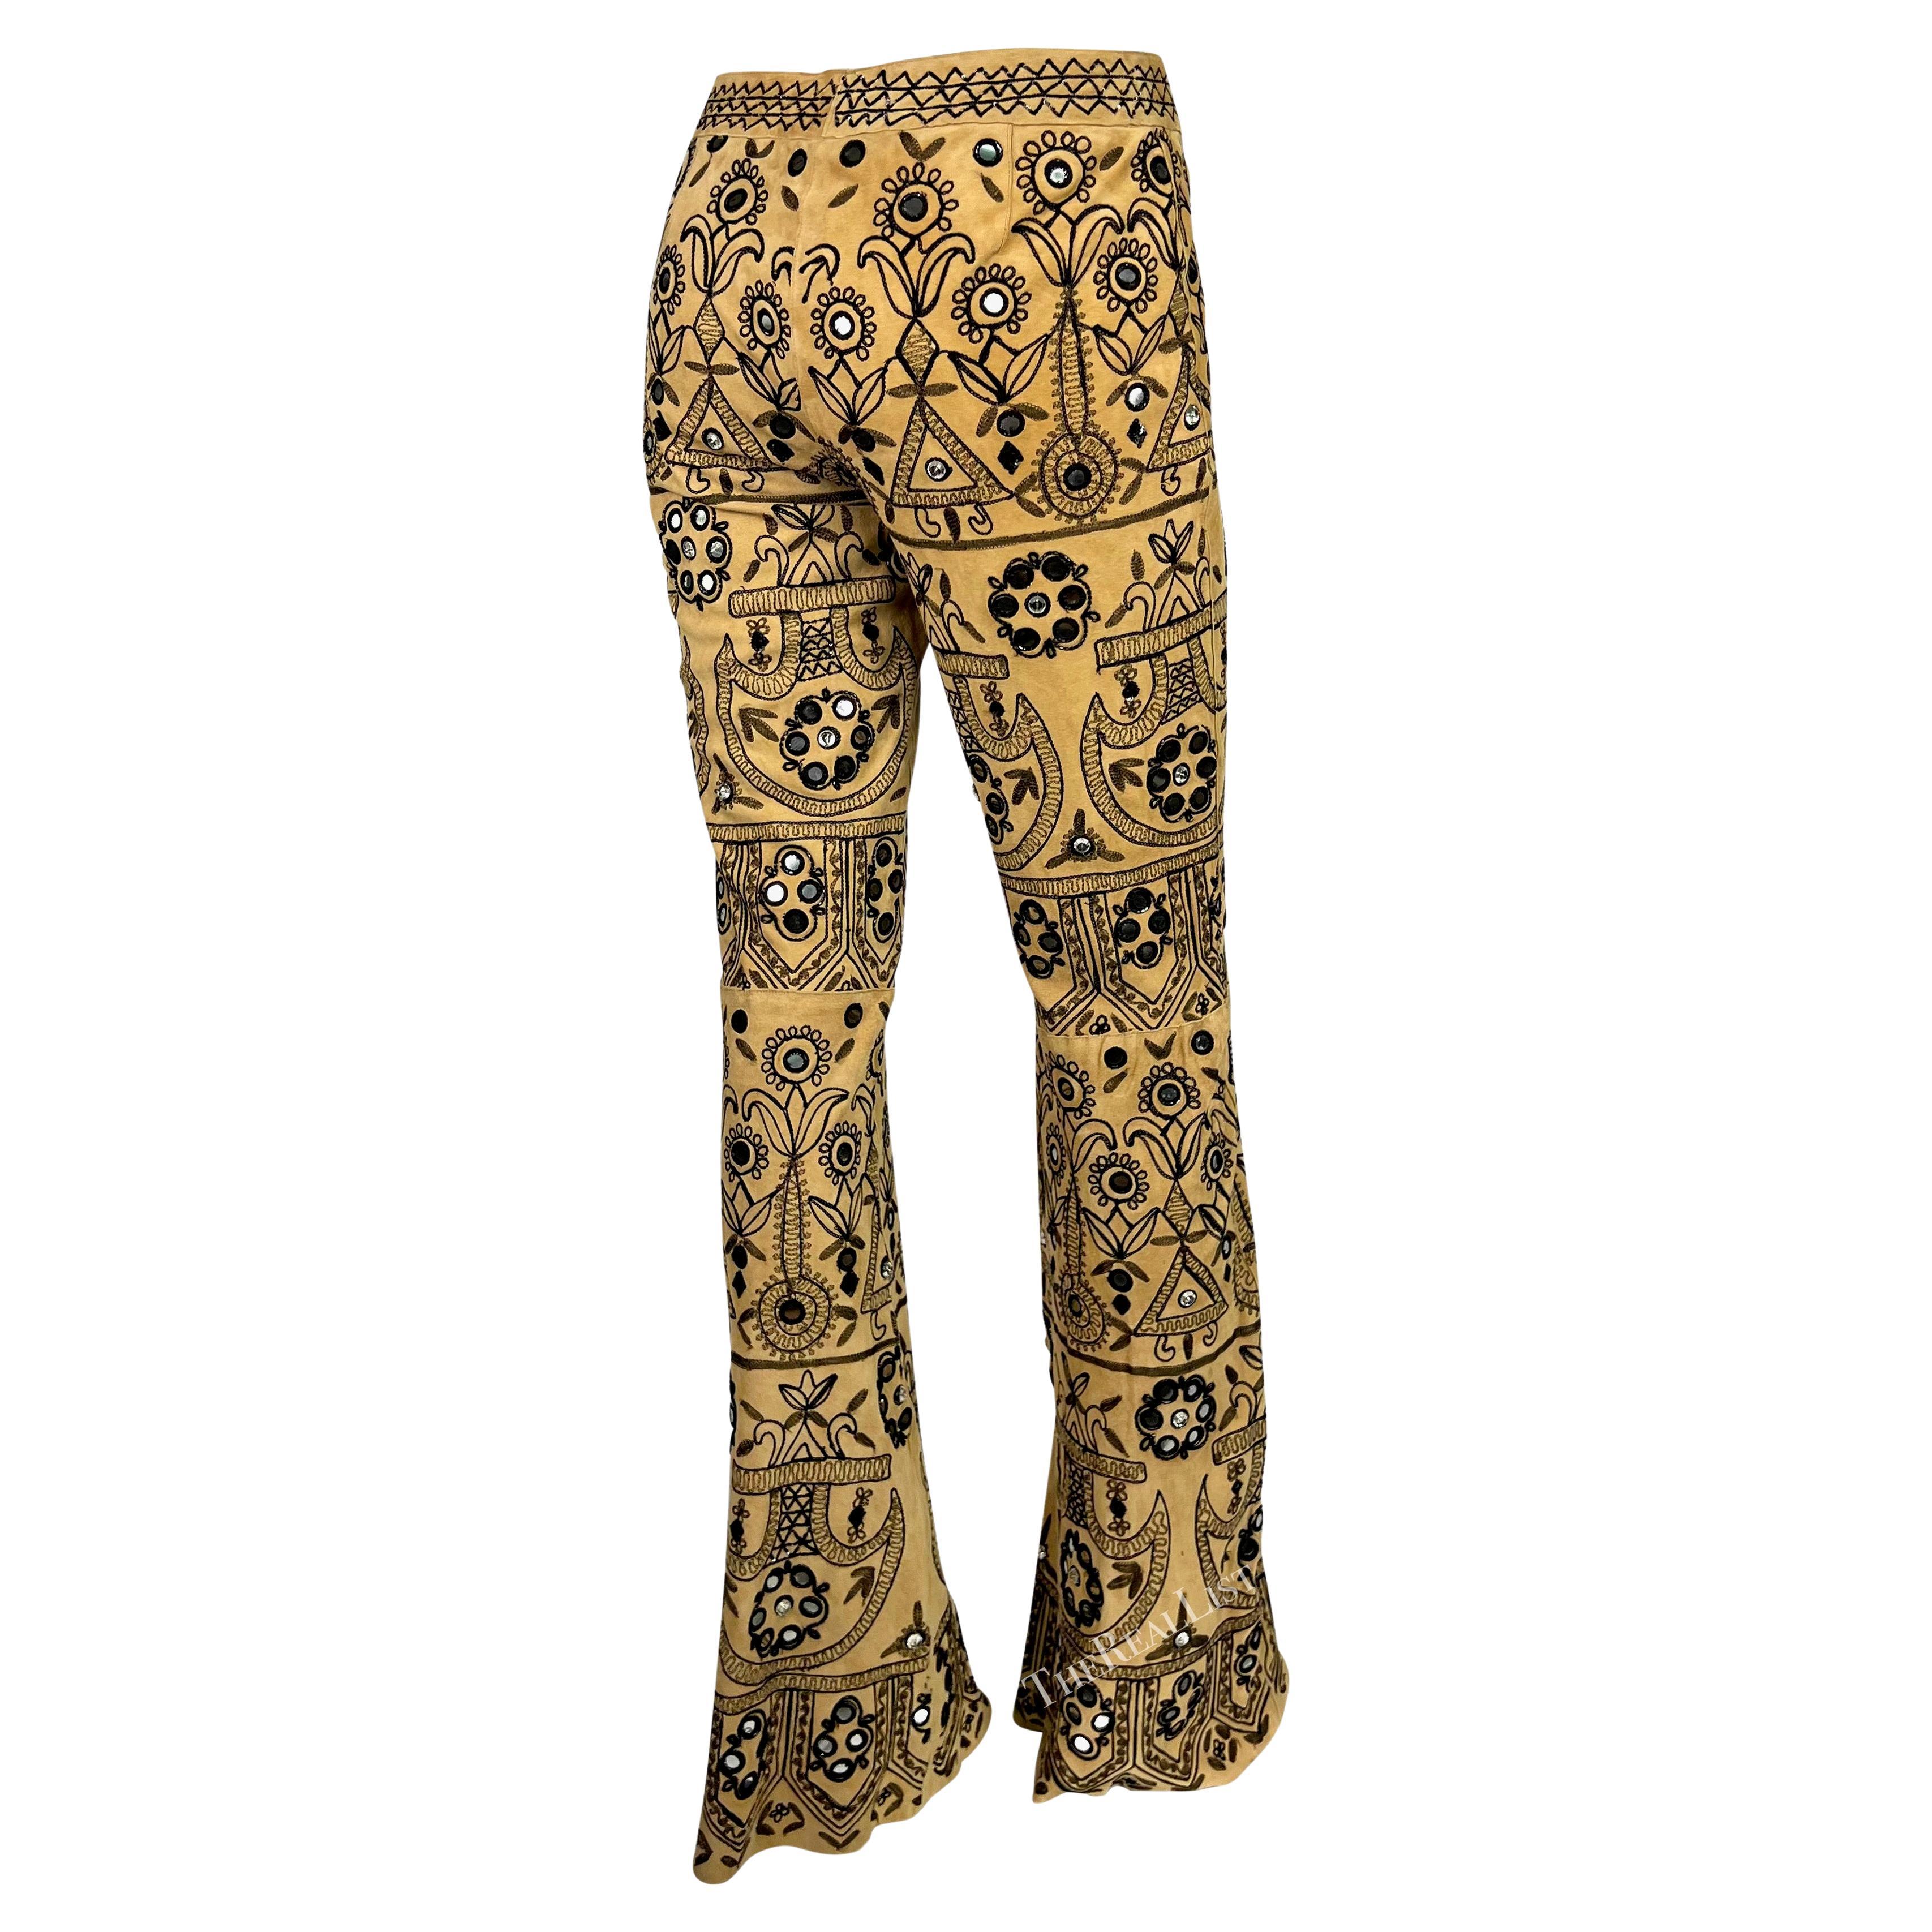 S/S 2001 Dolce & Gabbana Mirror Embroidered Tan Suede Flare Pants For Sale 8